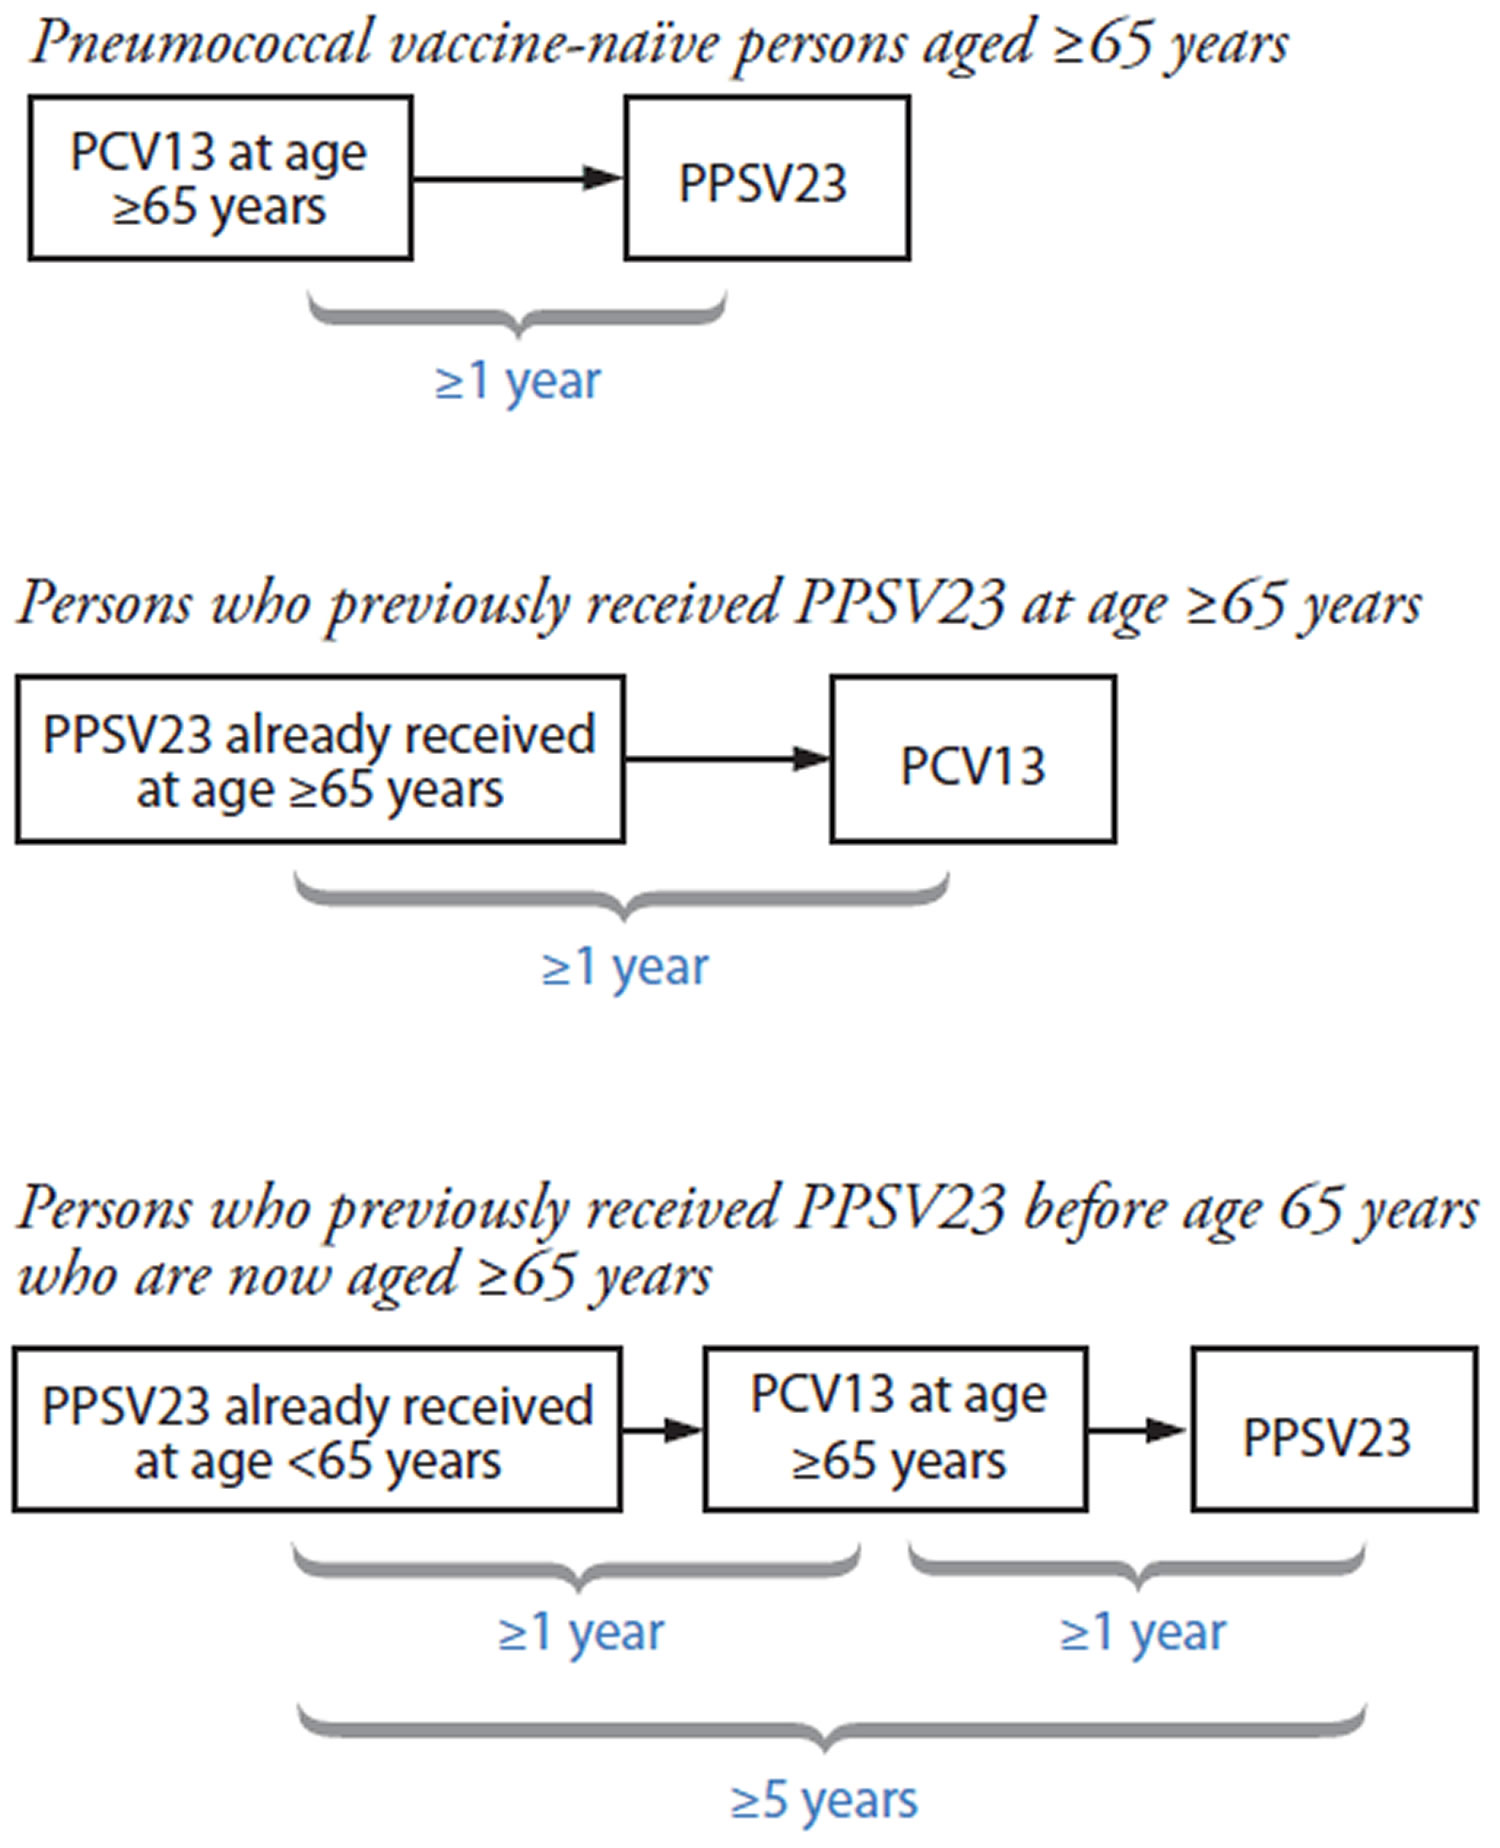 Recommended intervals for sequential use of pneumococcal vaccines